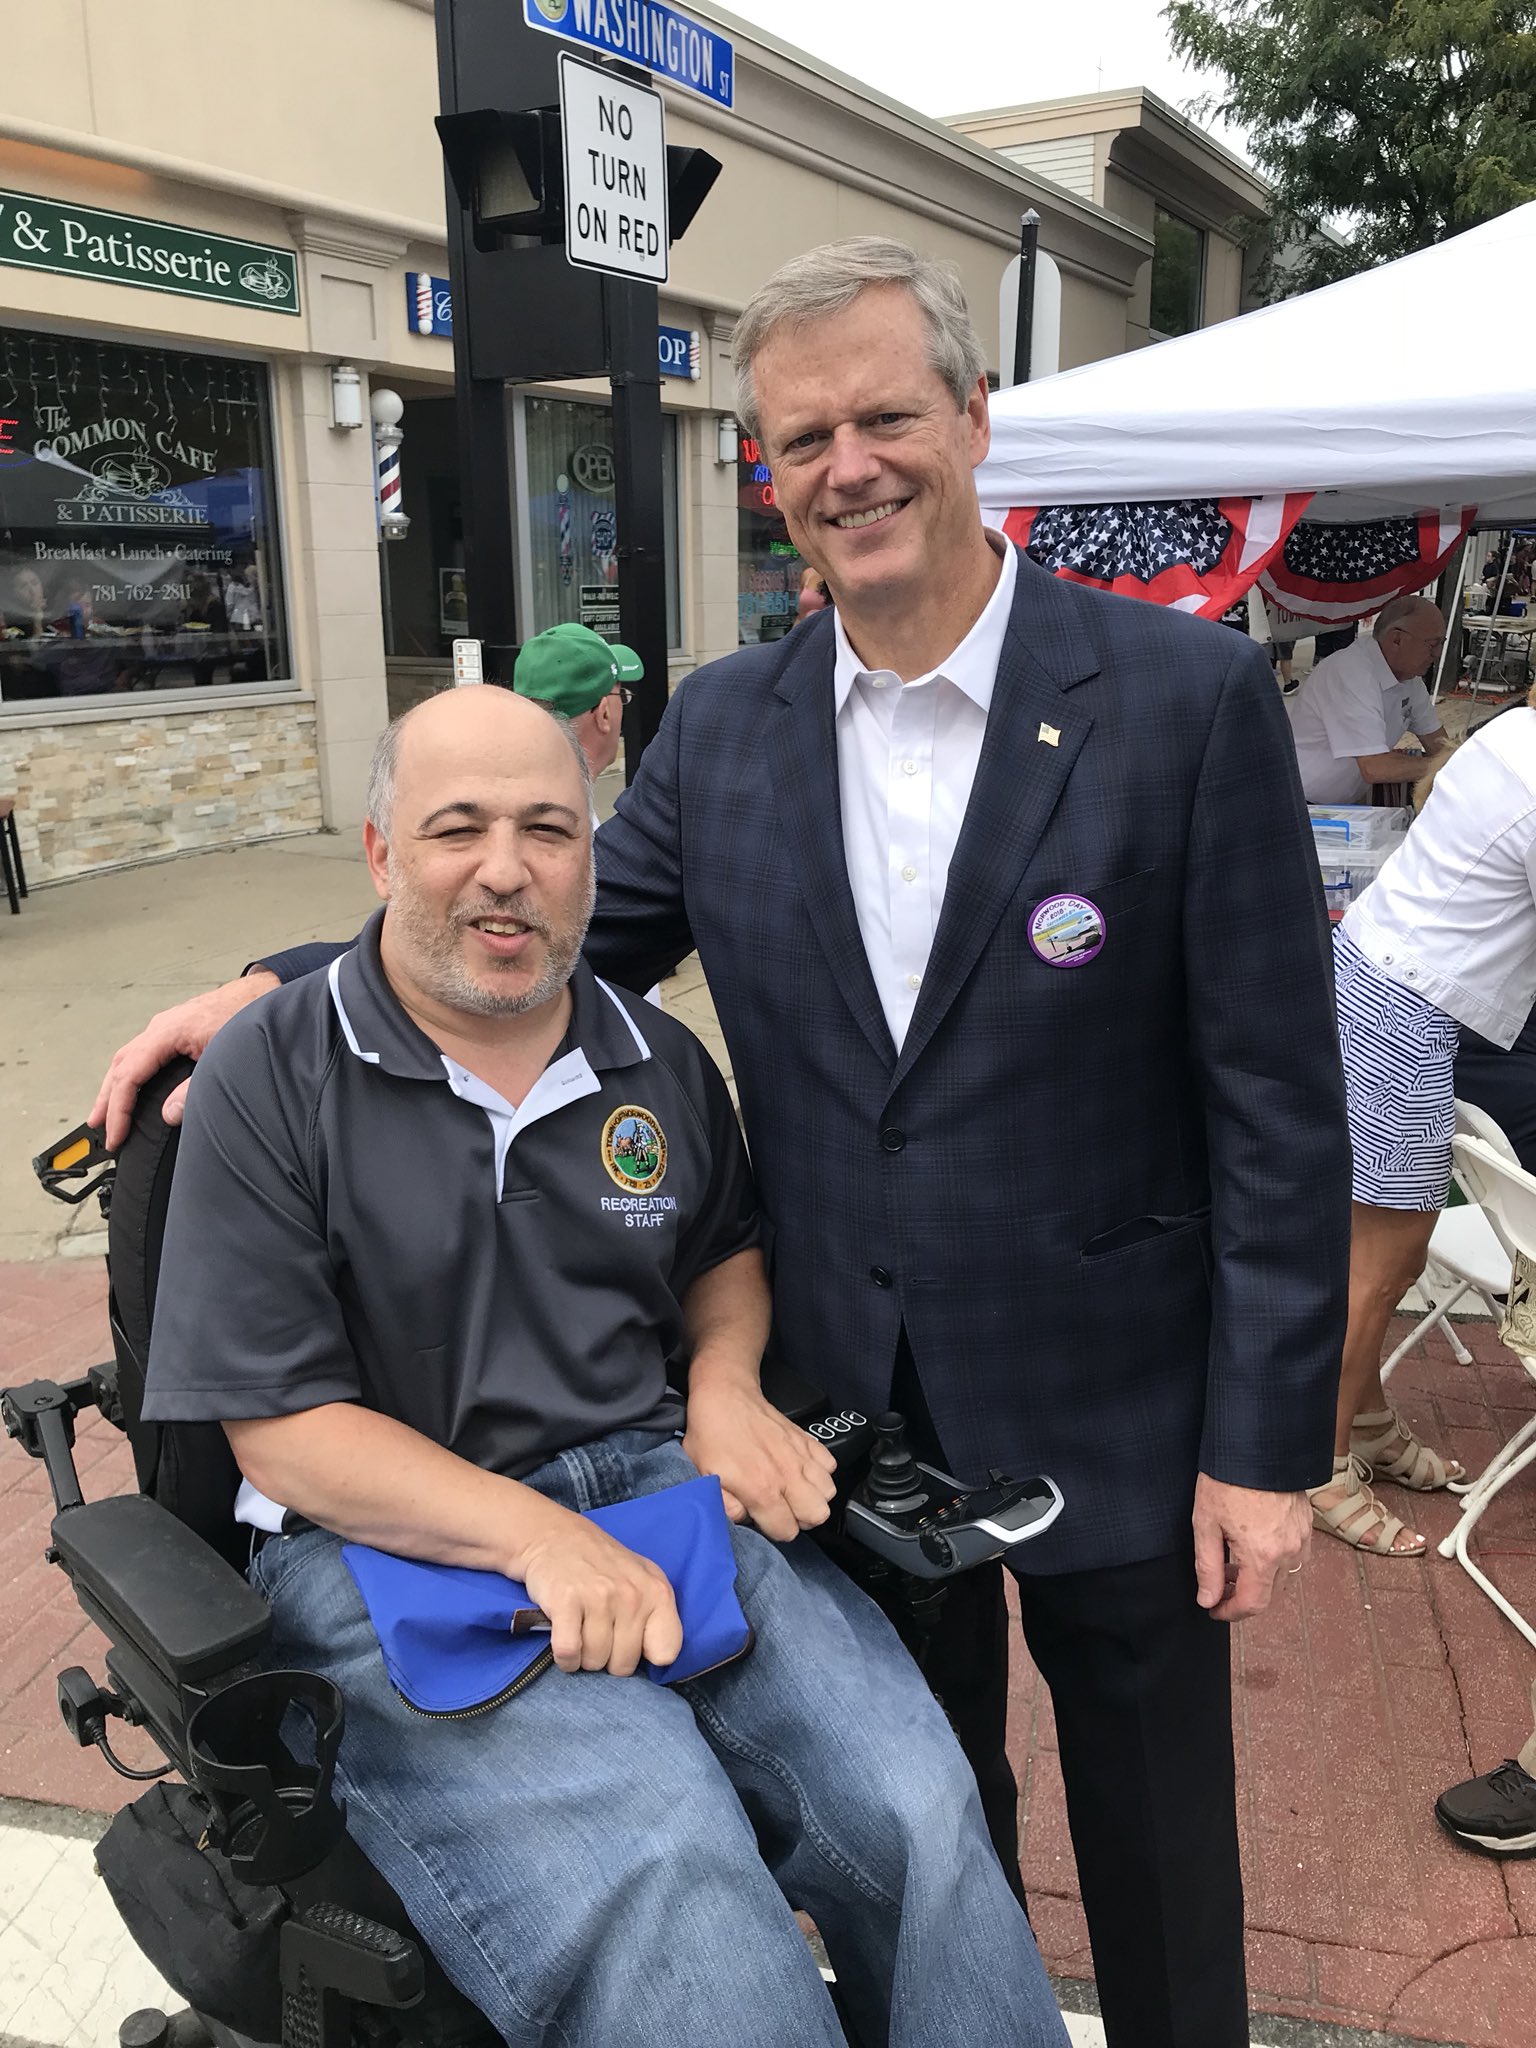 norwood-recreation-on-twitter-thank-you-massgovernor-for-stopping-by